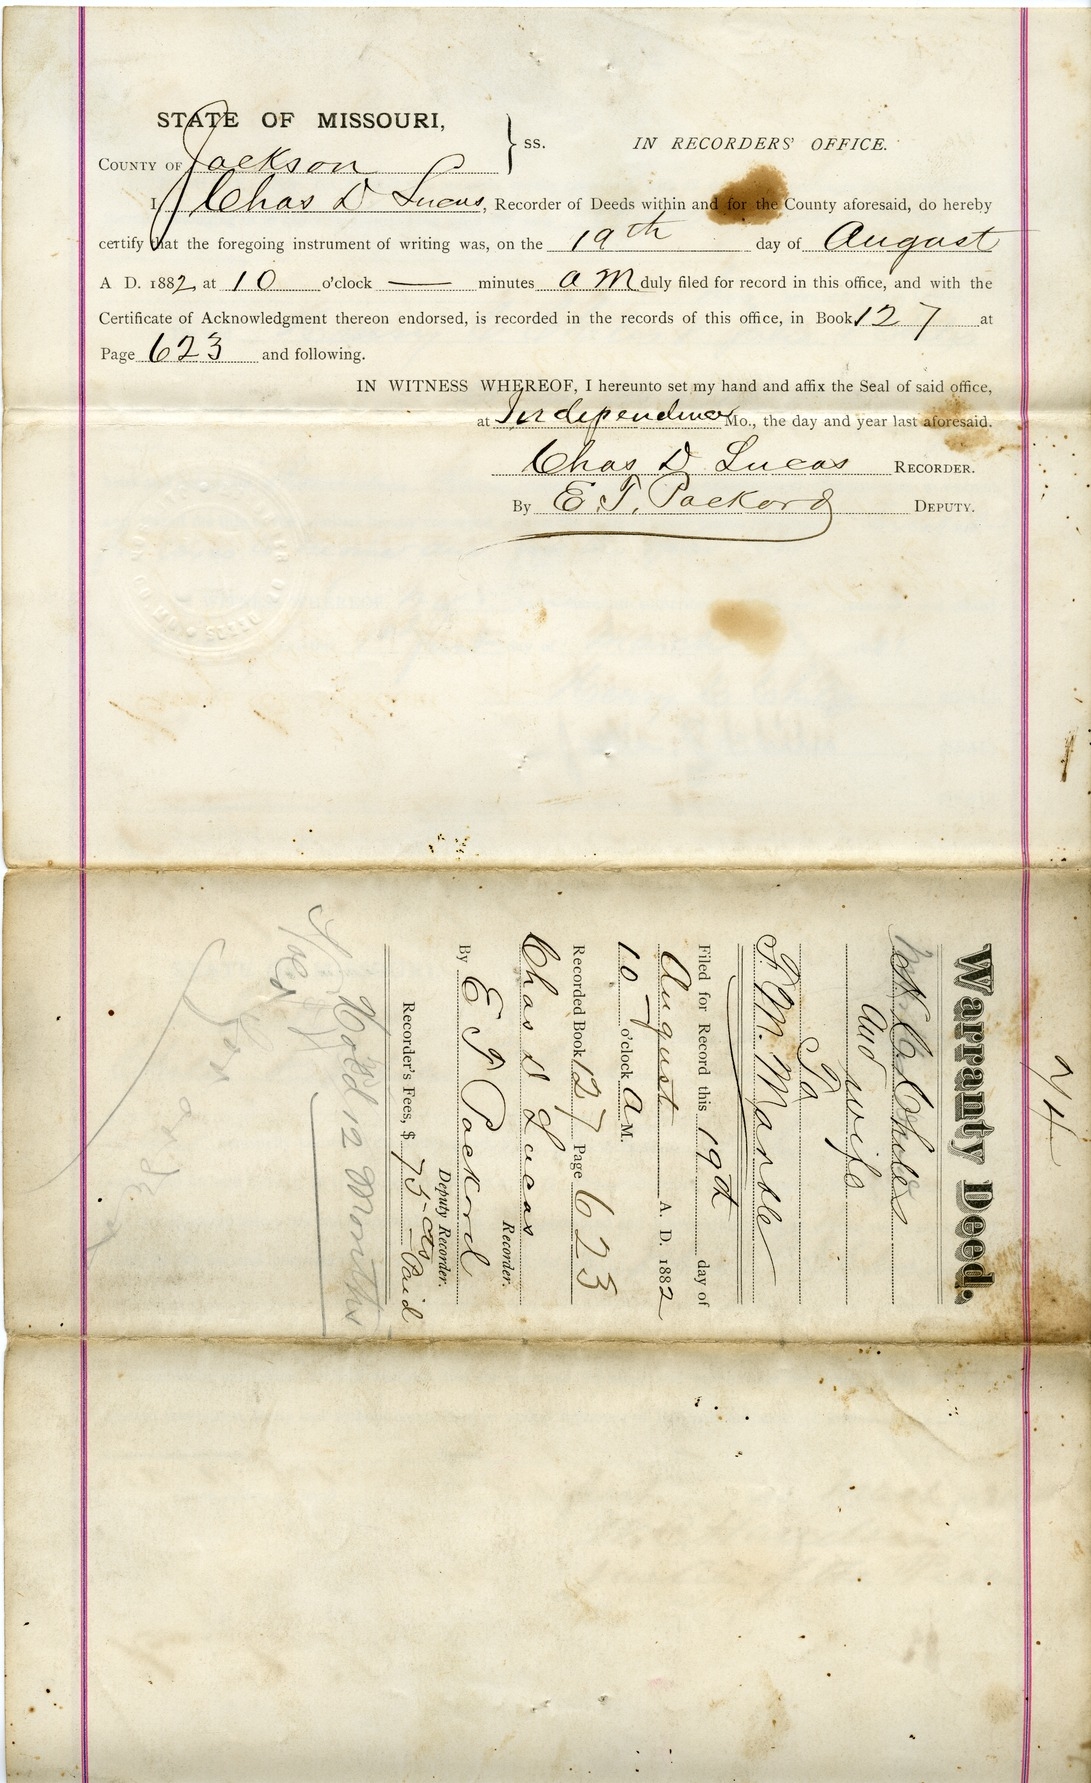 Warranty Deed from Henry C. Chiles and Julia P. Chiles to F. M. Marble